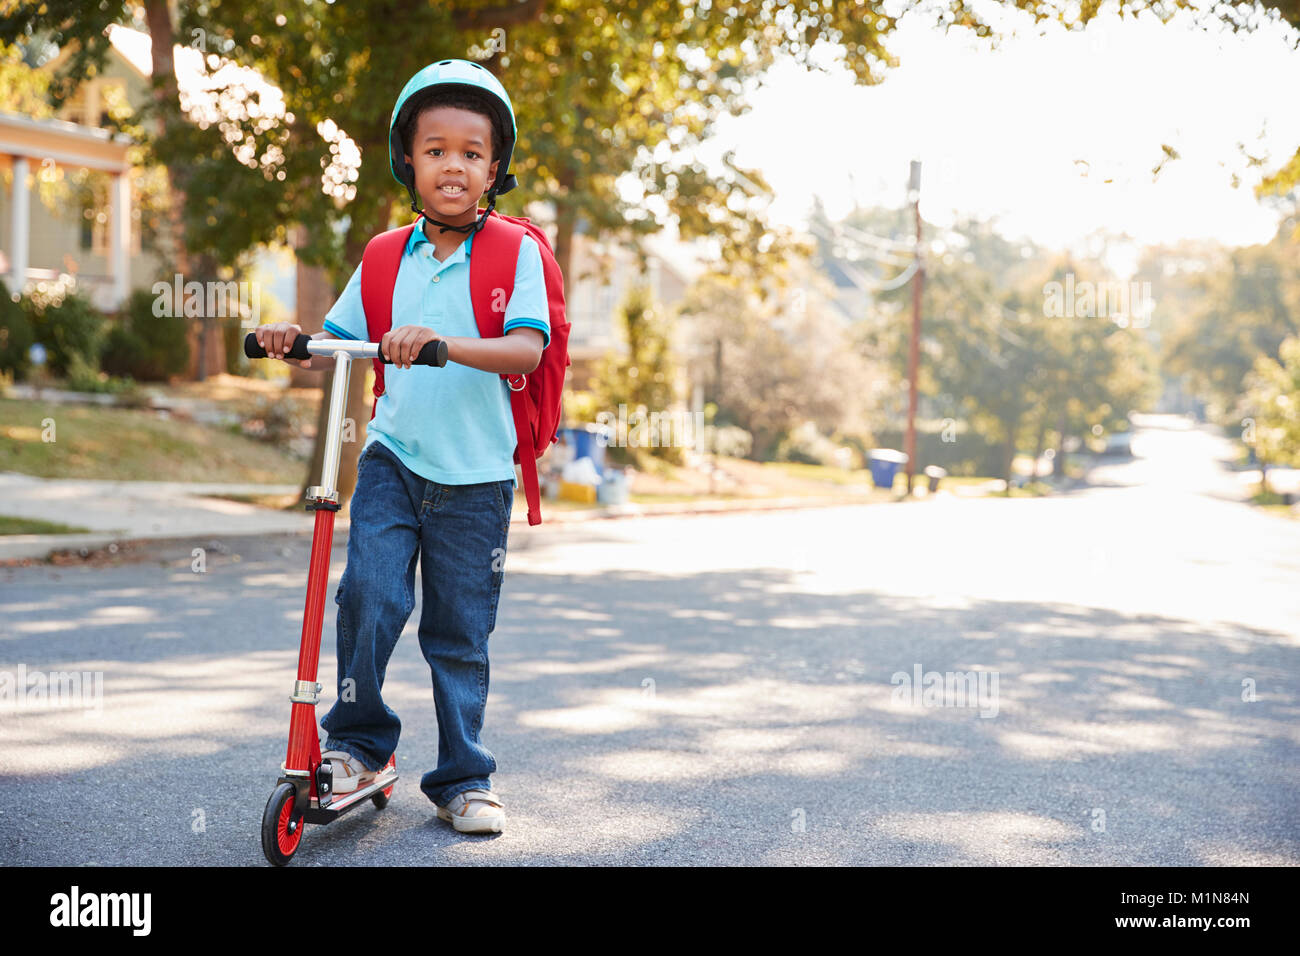 Young Boy Riding Along Street To School Stock Photo -